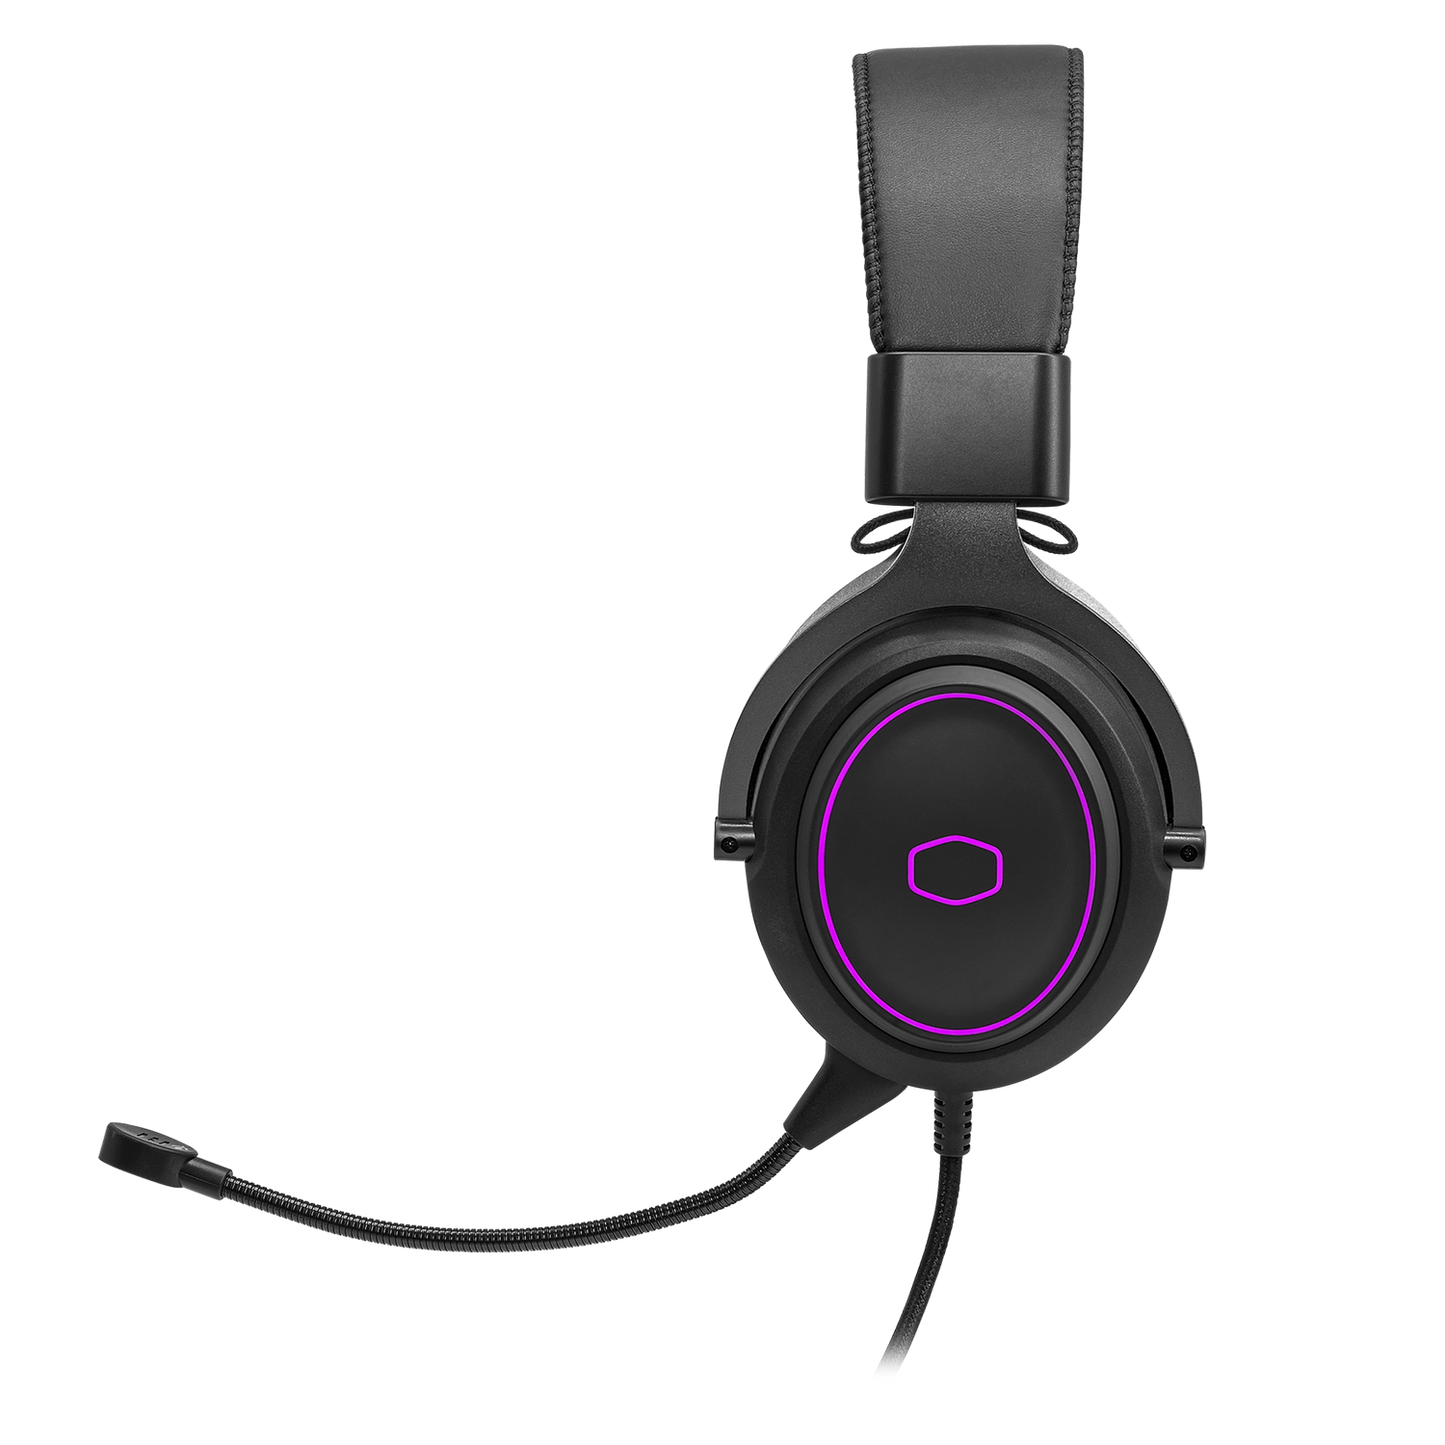 Cooler Master CH331 USB Gaming Headset